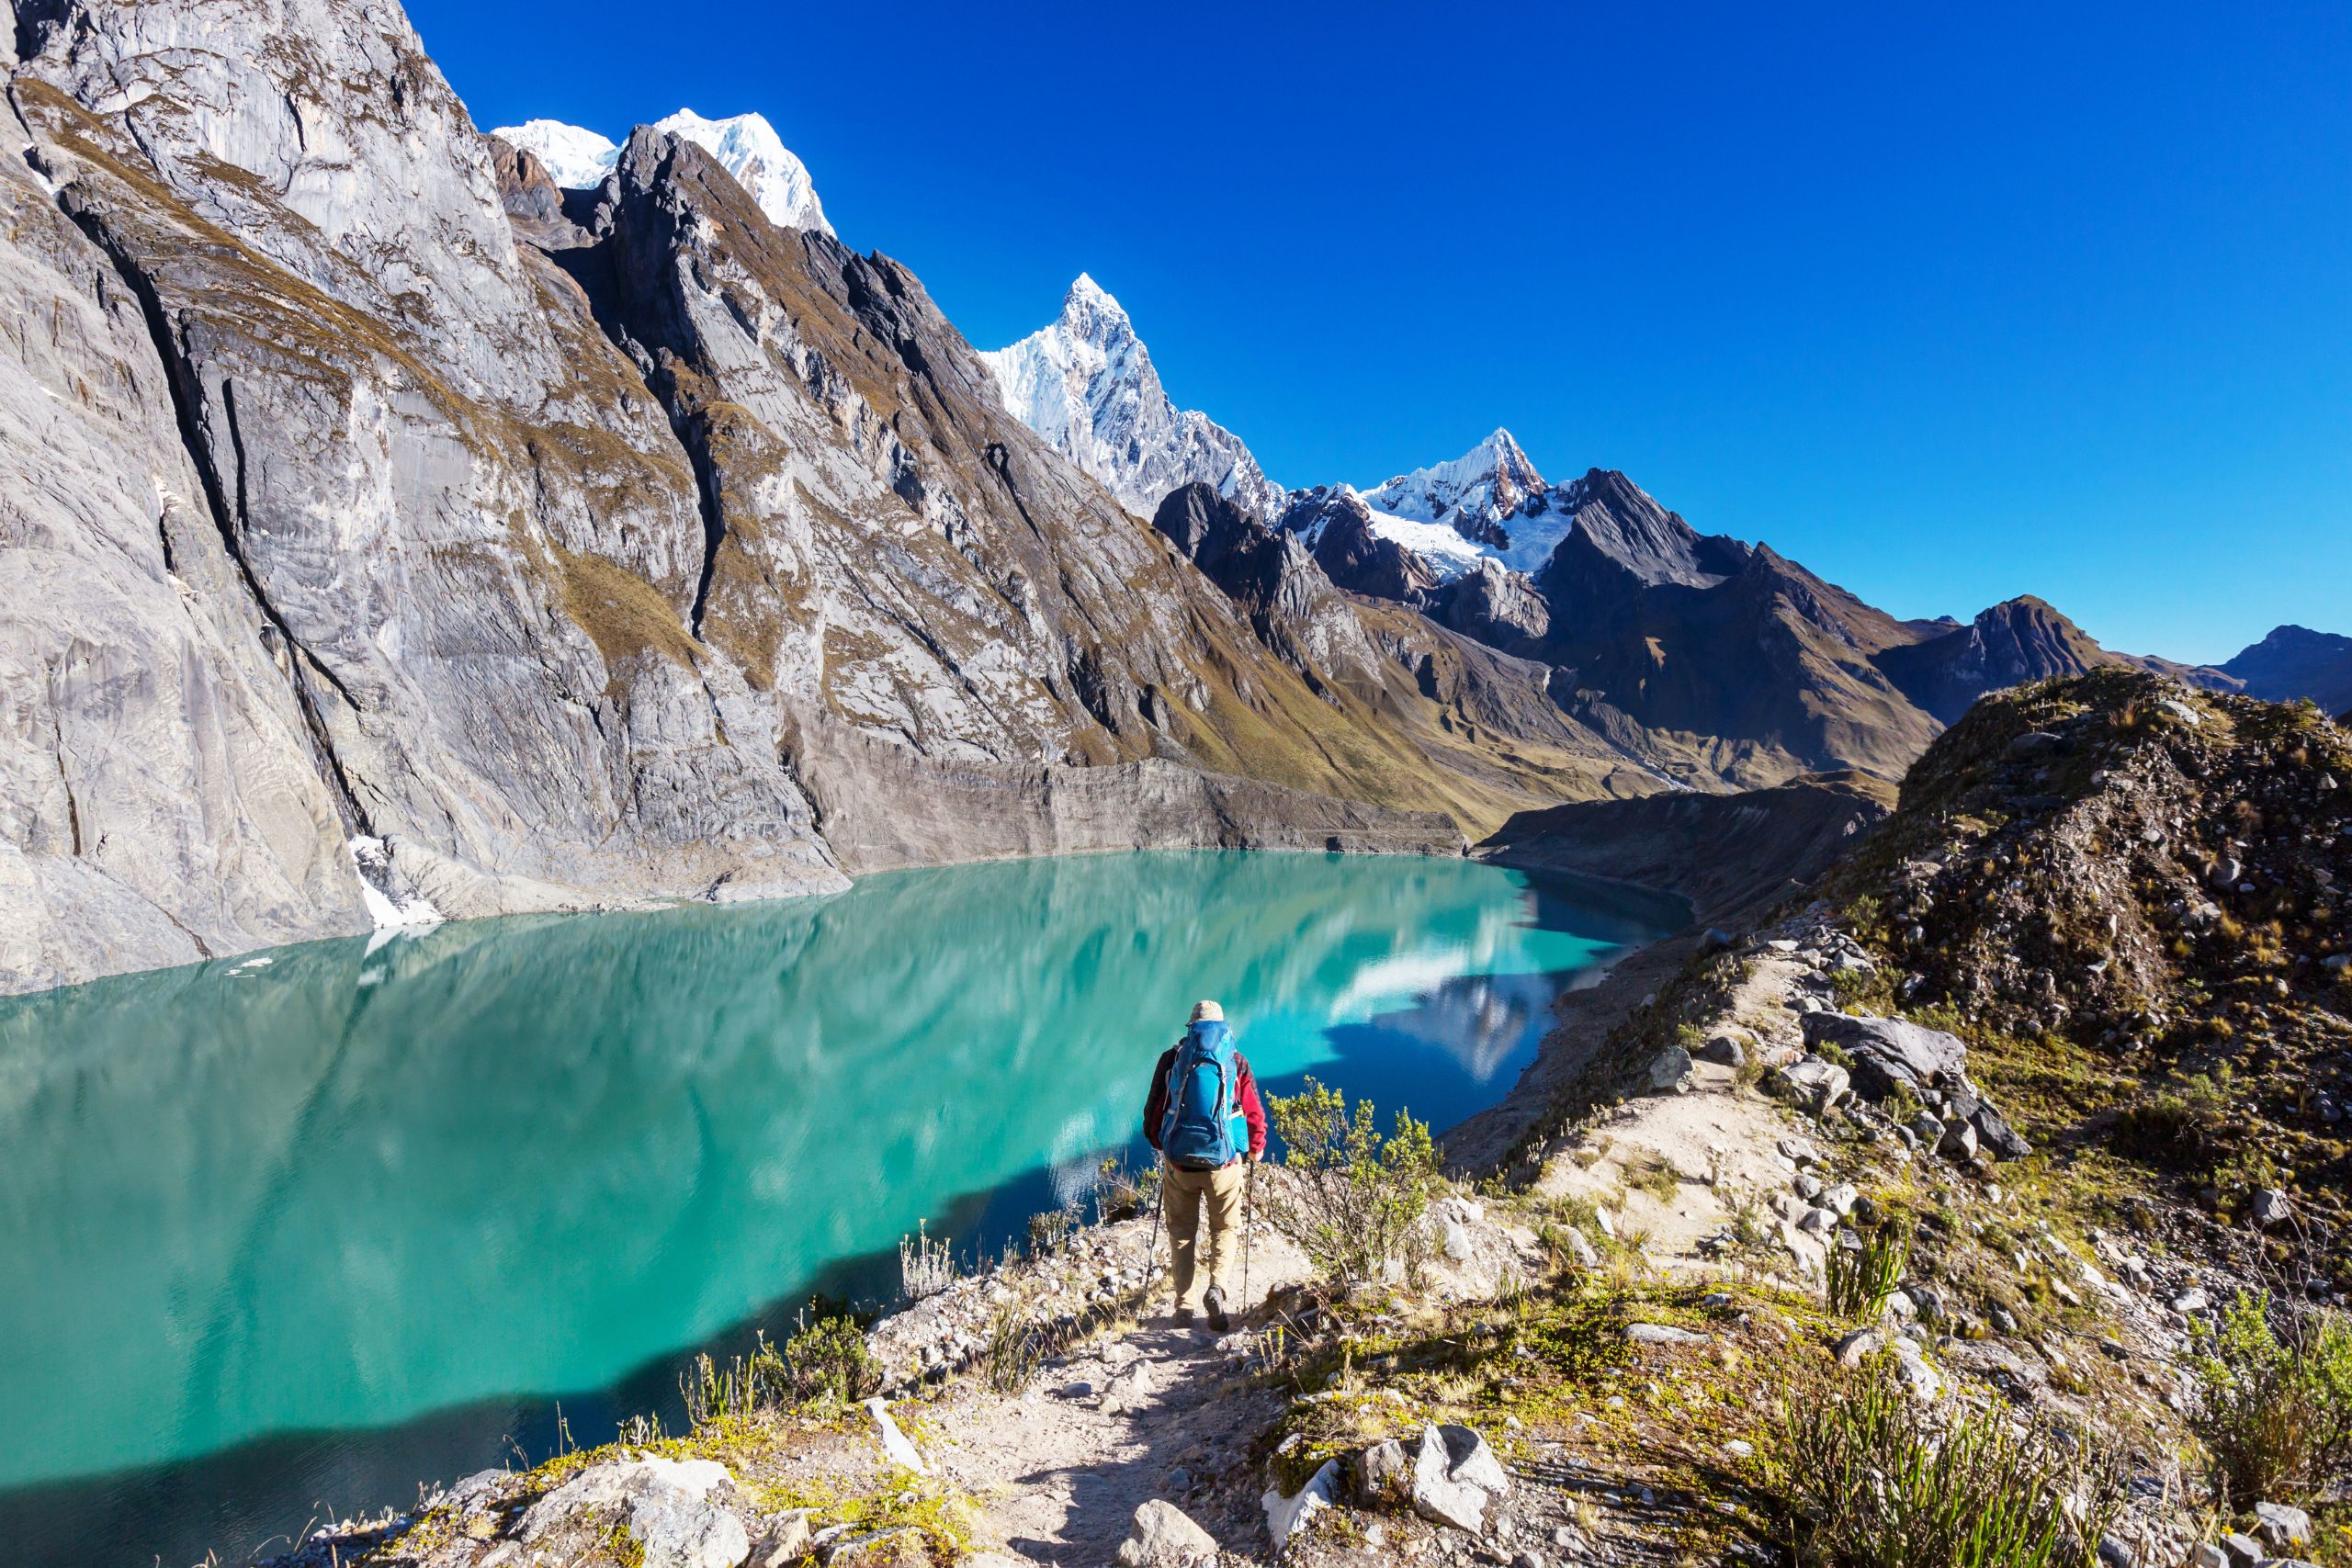 The Best Hiking Trails in the Peruvian Andes